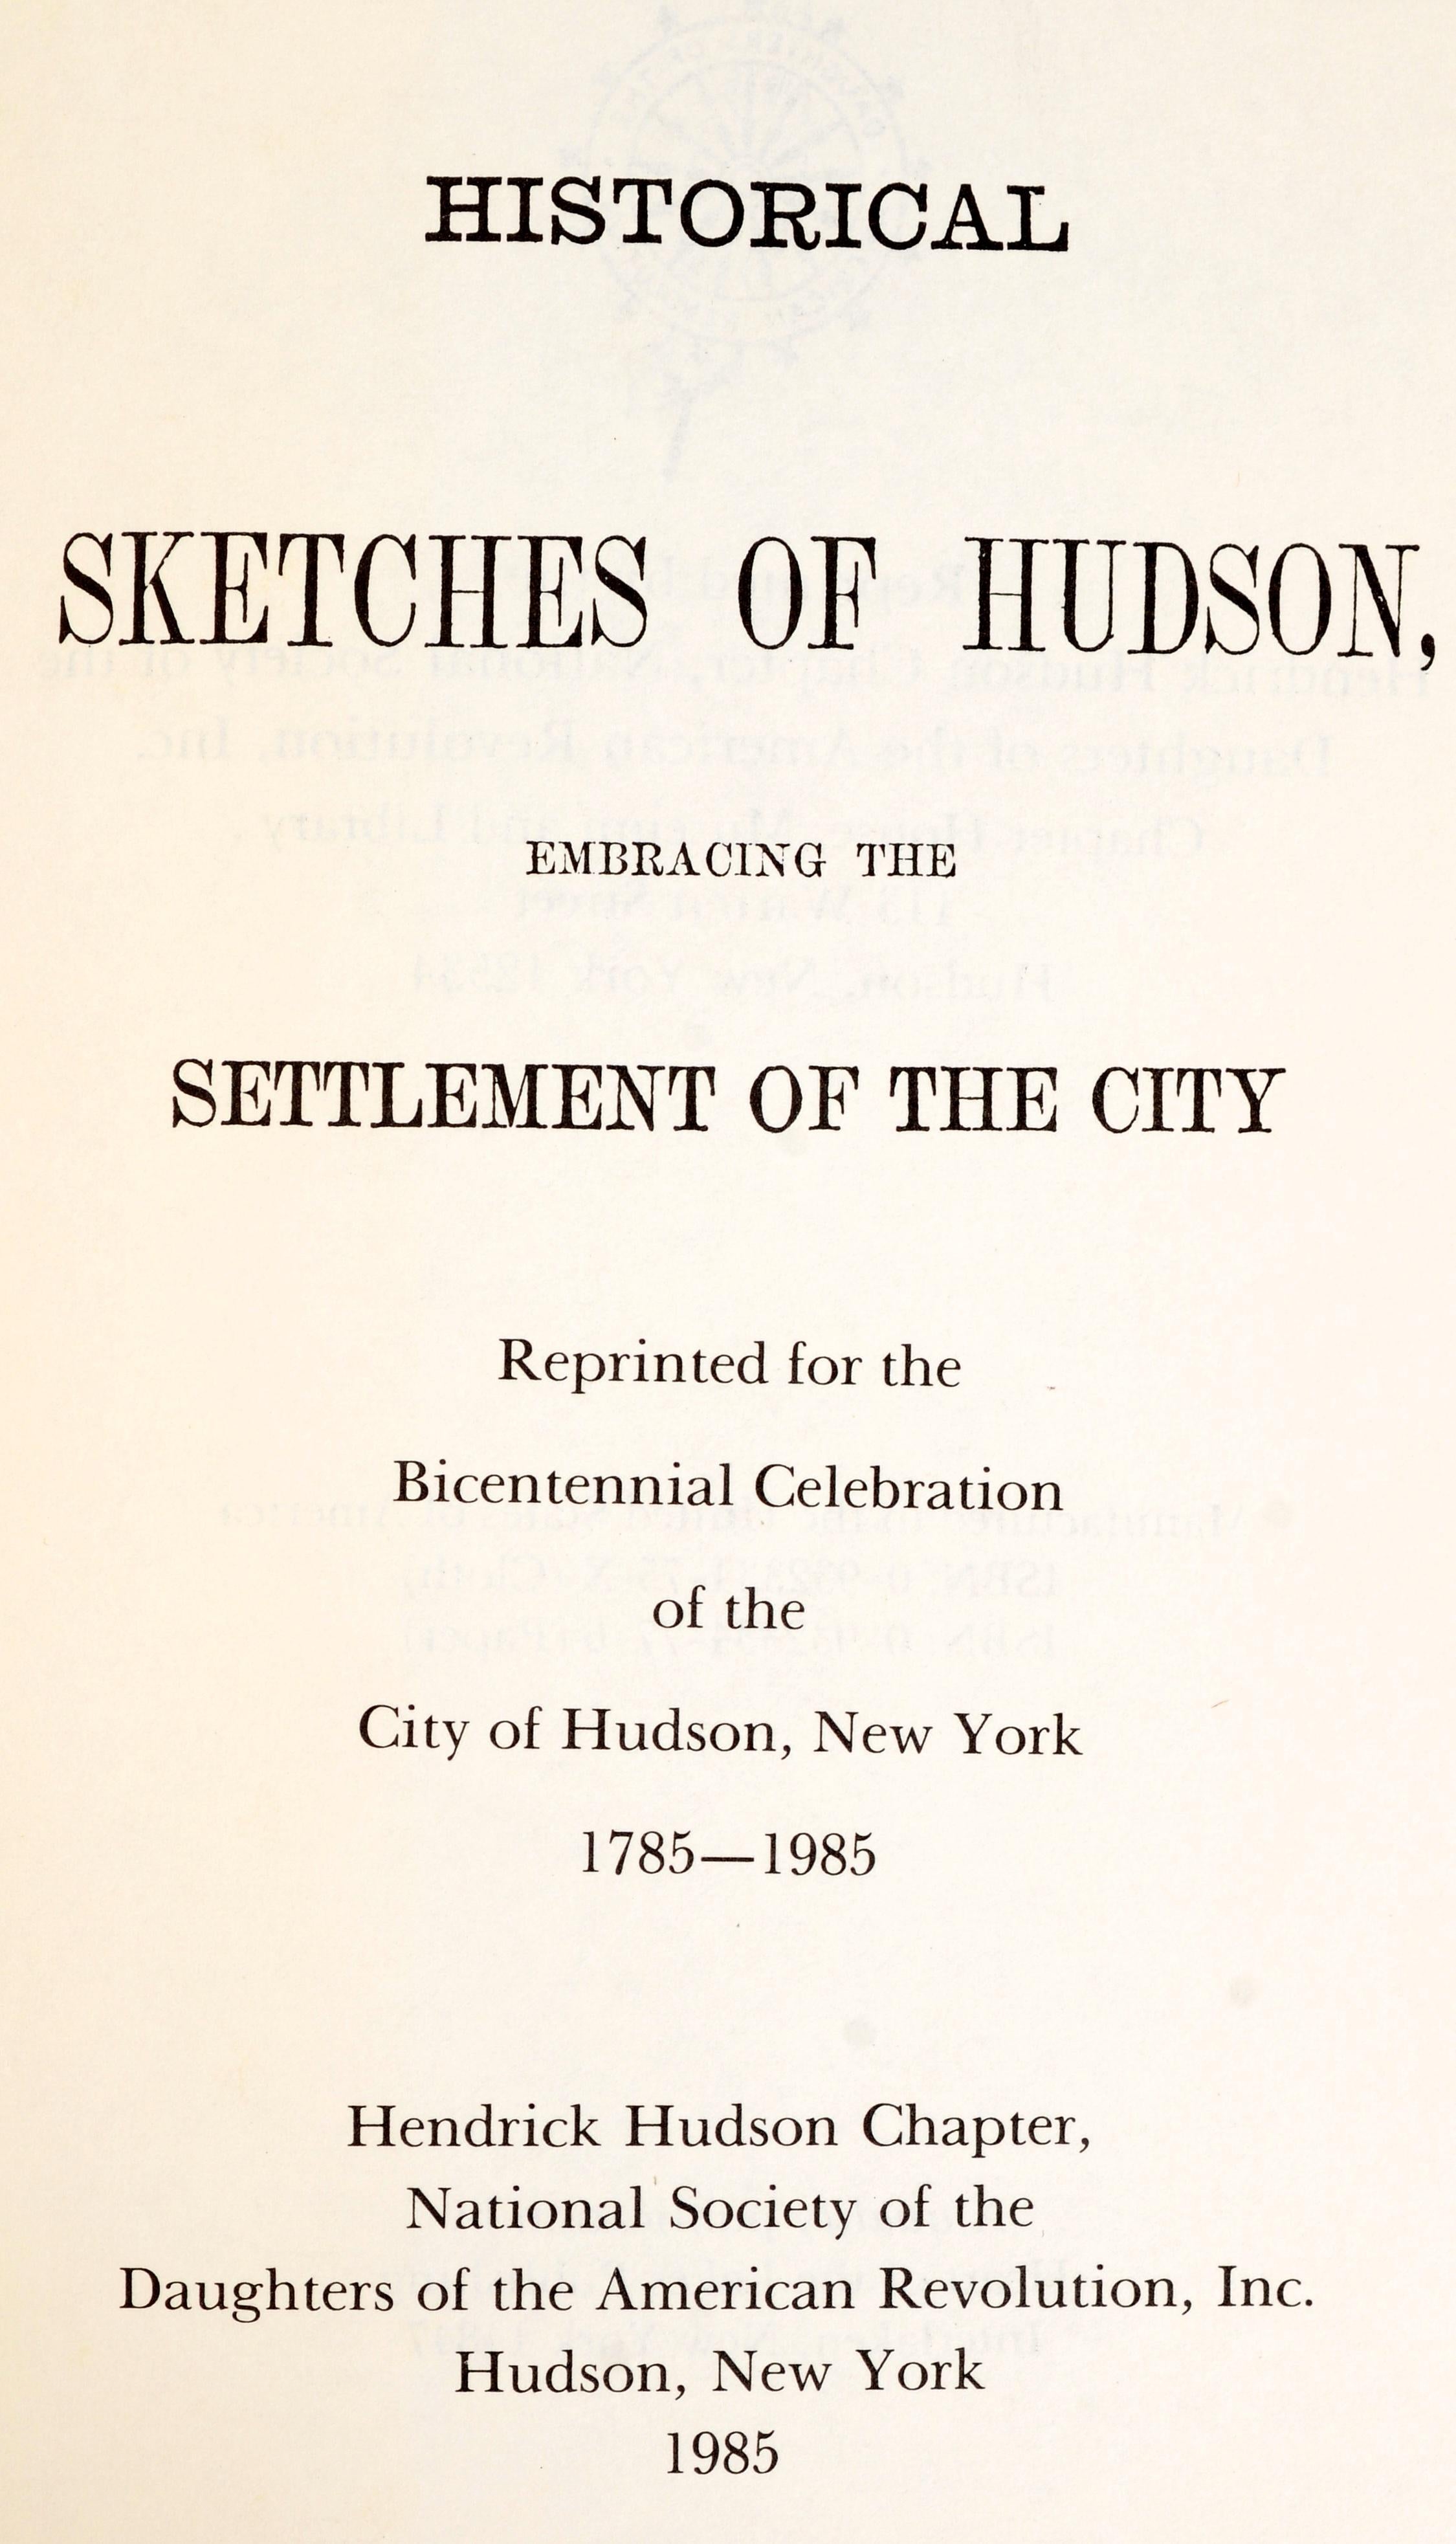 Historical Sketches of Hudson, Embracing the Settlement of the City Reprinted for the Bicentennial Celebration of the City of Hudson, New York 1785-1985 by Stephen Miller. Hendrick Hudson Chapter, National Society of the Daughters of the American